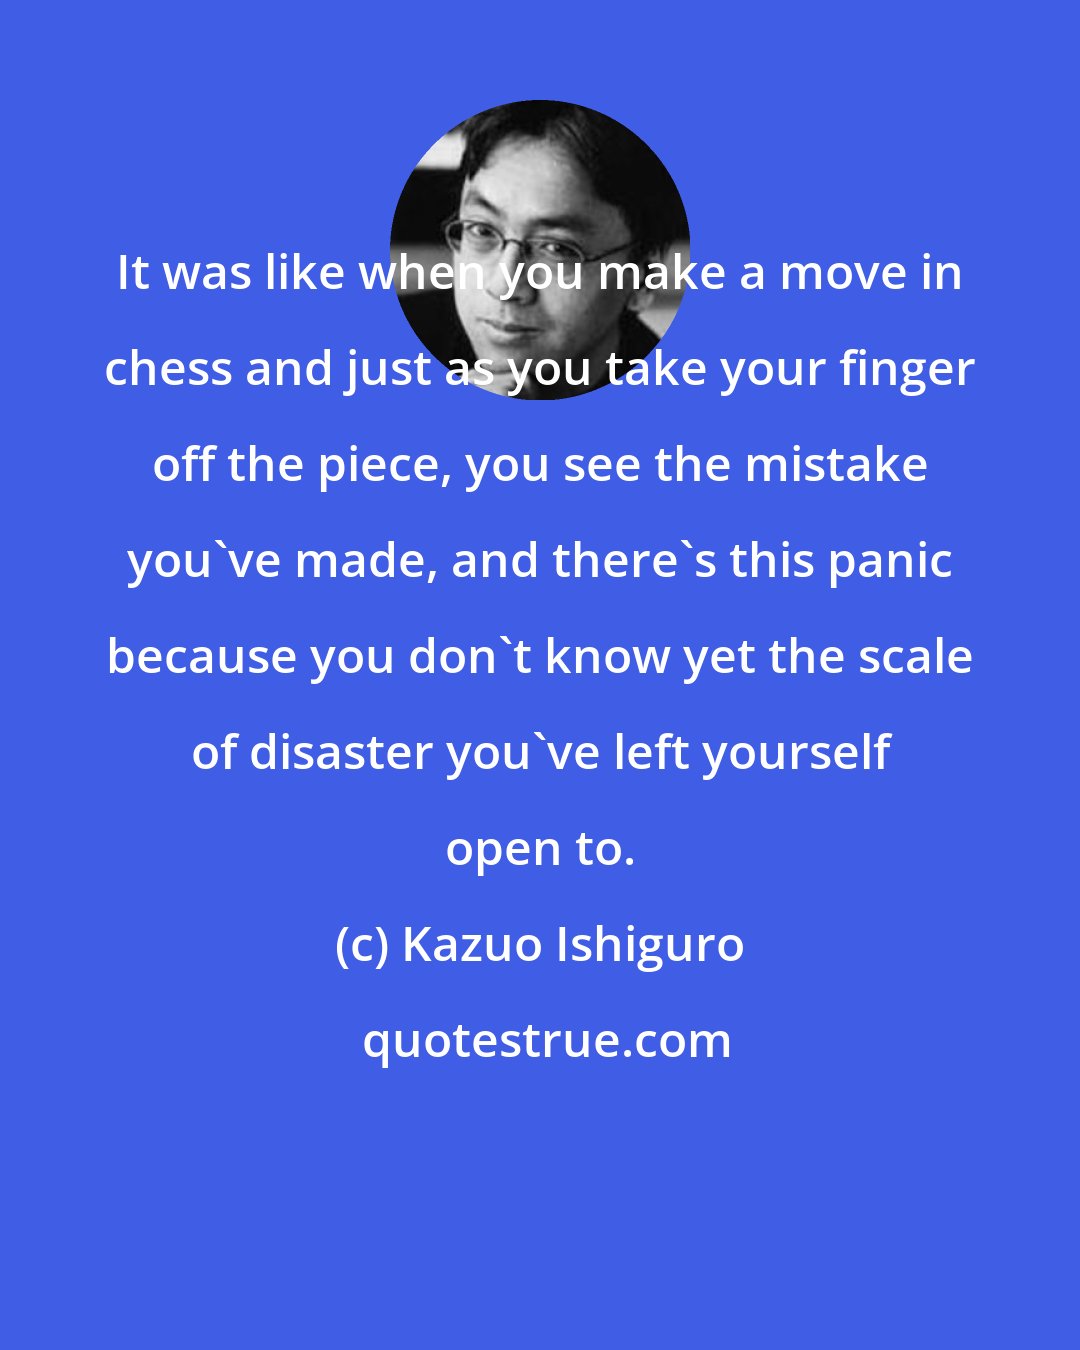 Kazuo Ishiguro: It was like when you make a move in chess and just as you take your finger off the piece, you see the mistake you've made, and there's this panic because you don't know yet the scale of disaster you've left yourself open to.